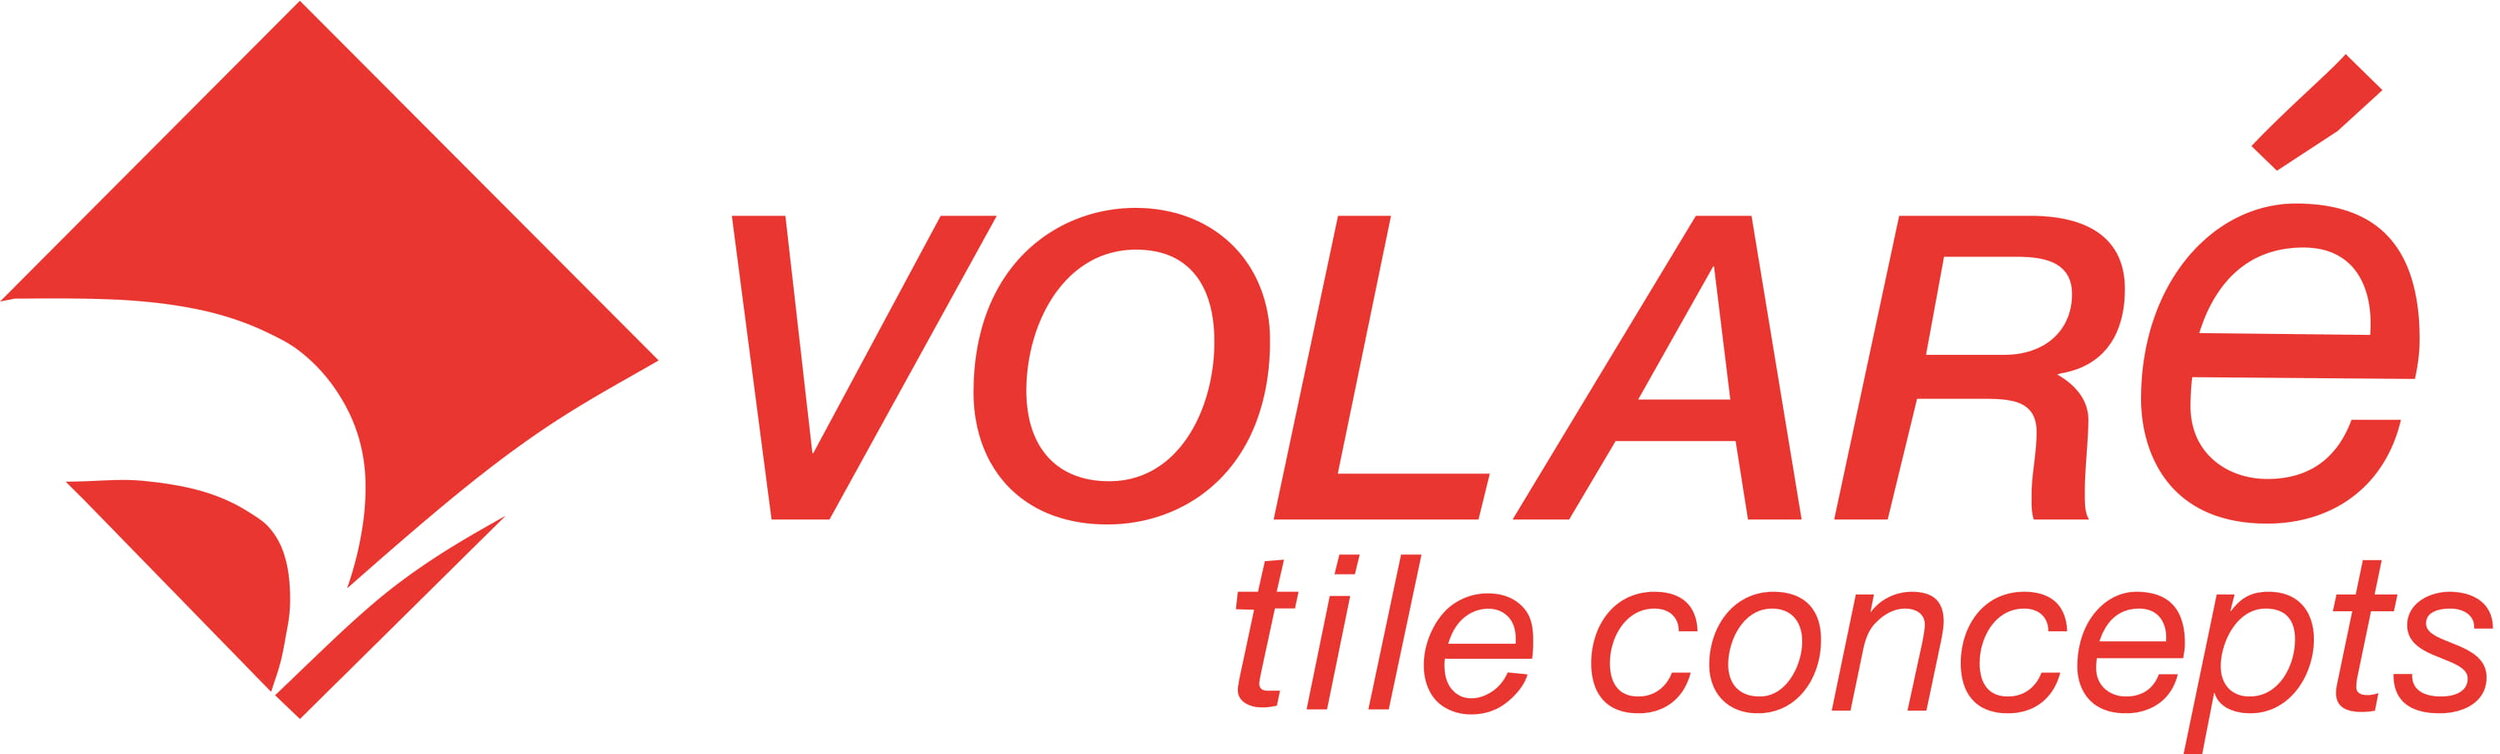 Volare Tile Concepts logo for print RED -1.jpg